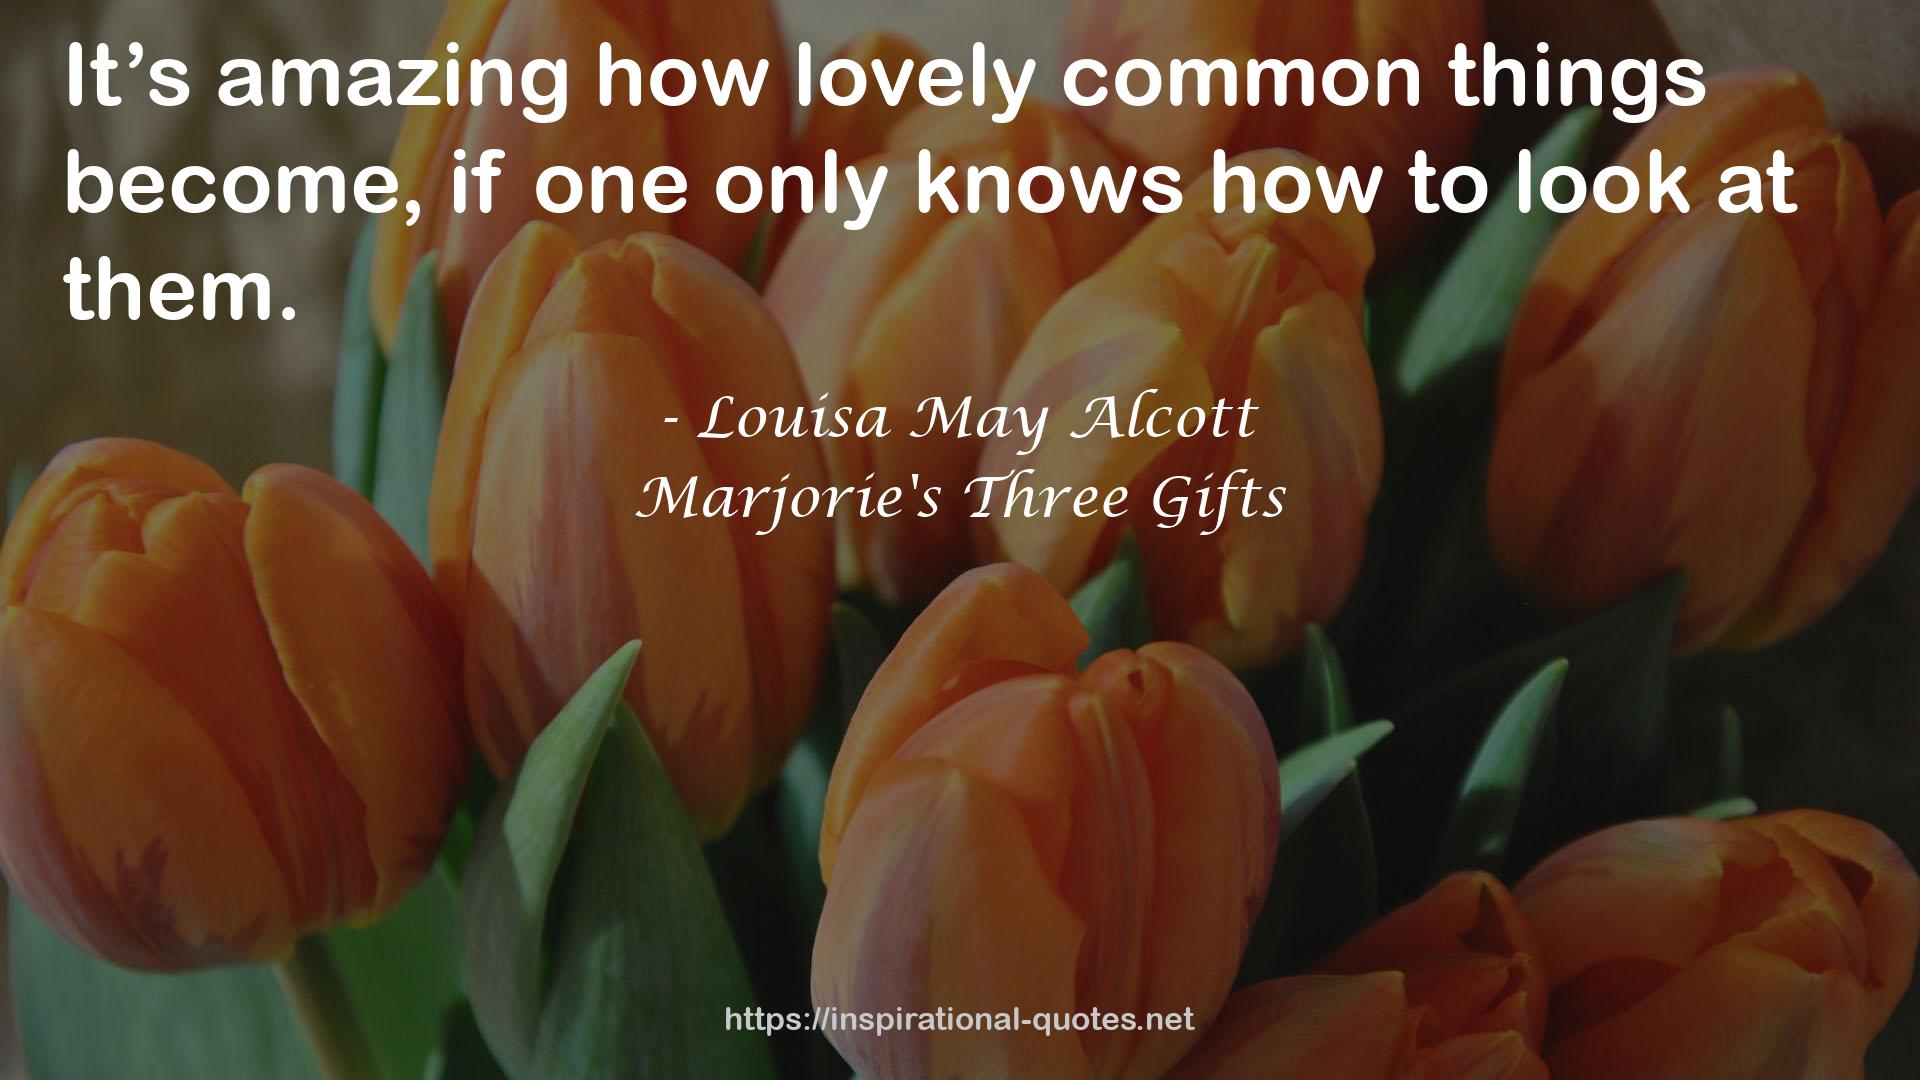 Marjorie's Three Gifts QUOTES